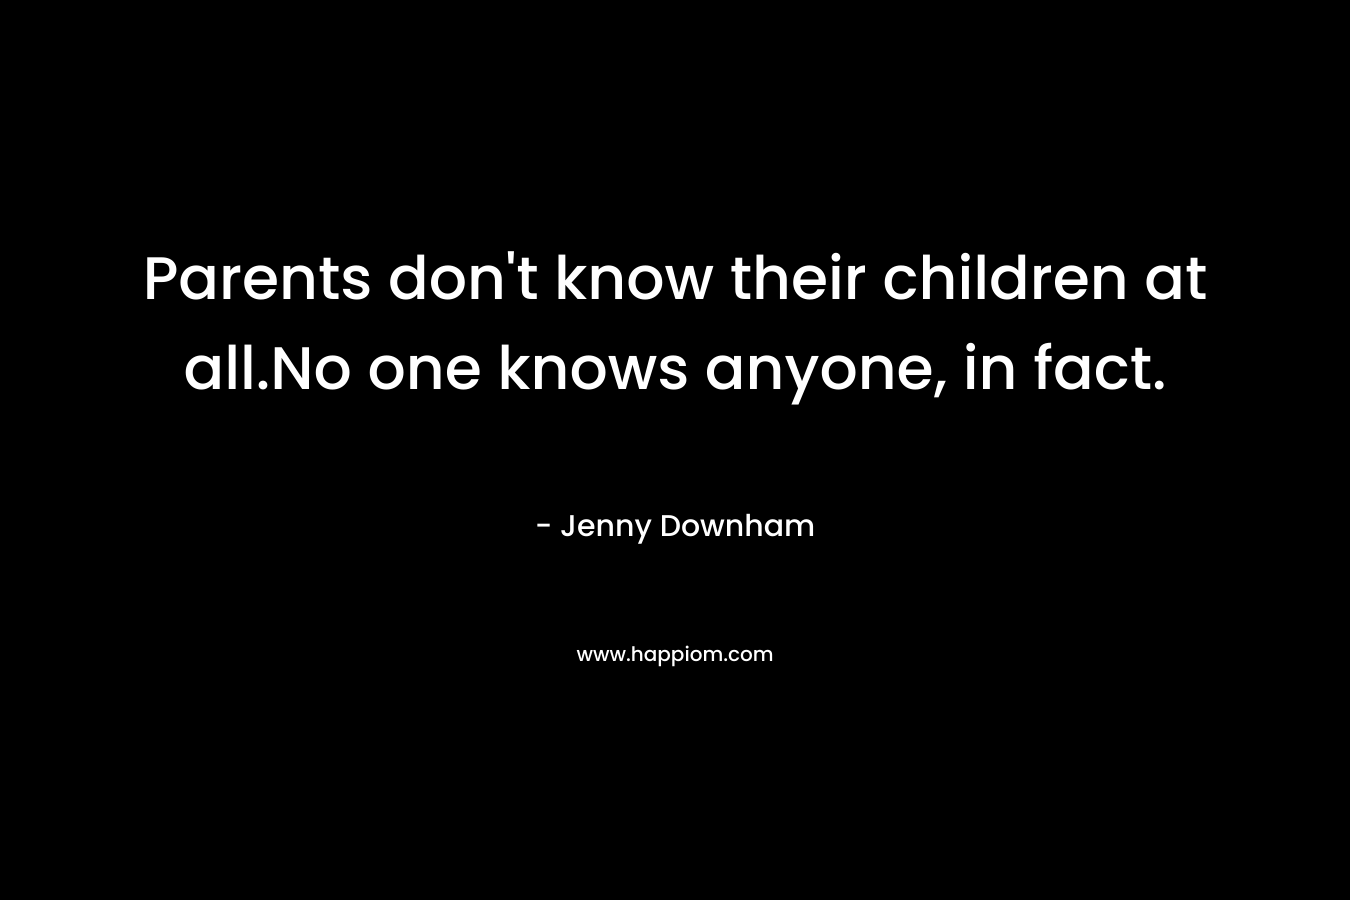 Parents don't know their children at all.No one knows anyone, in fact.